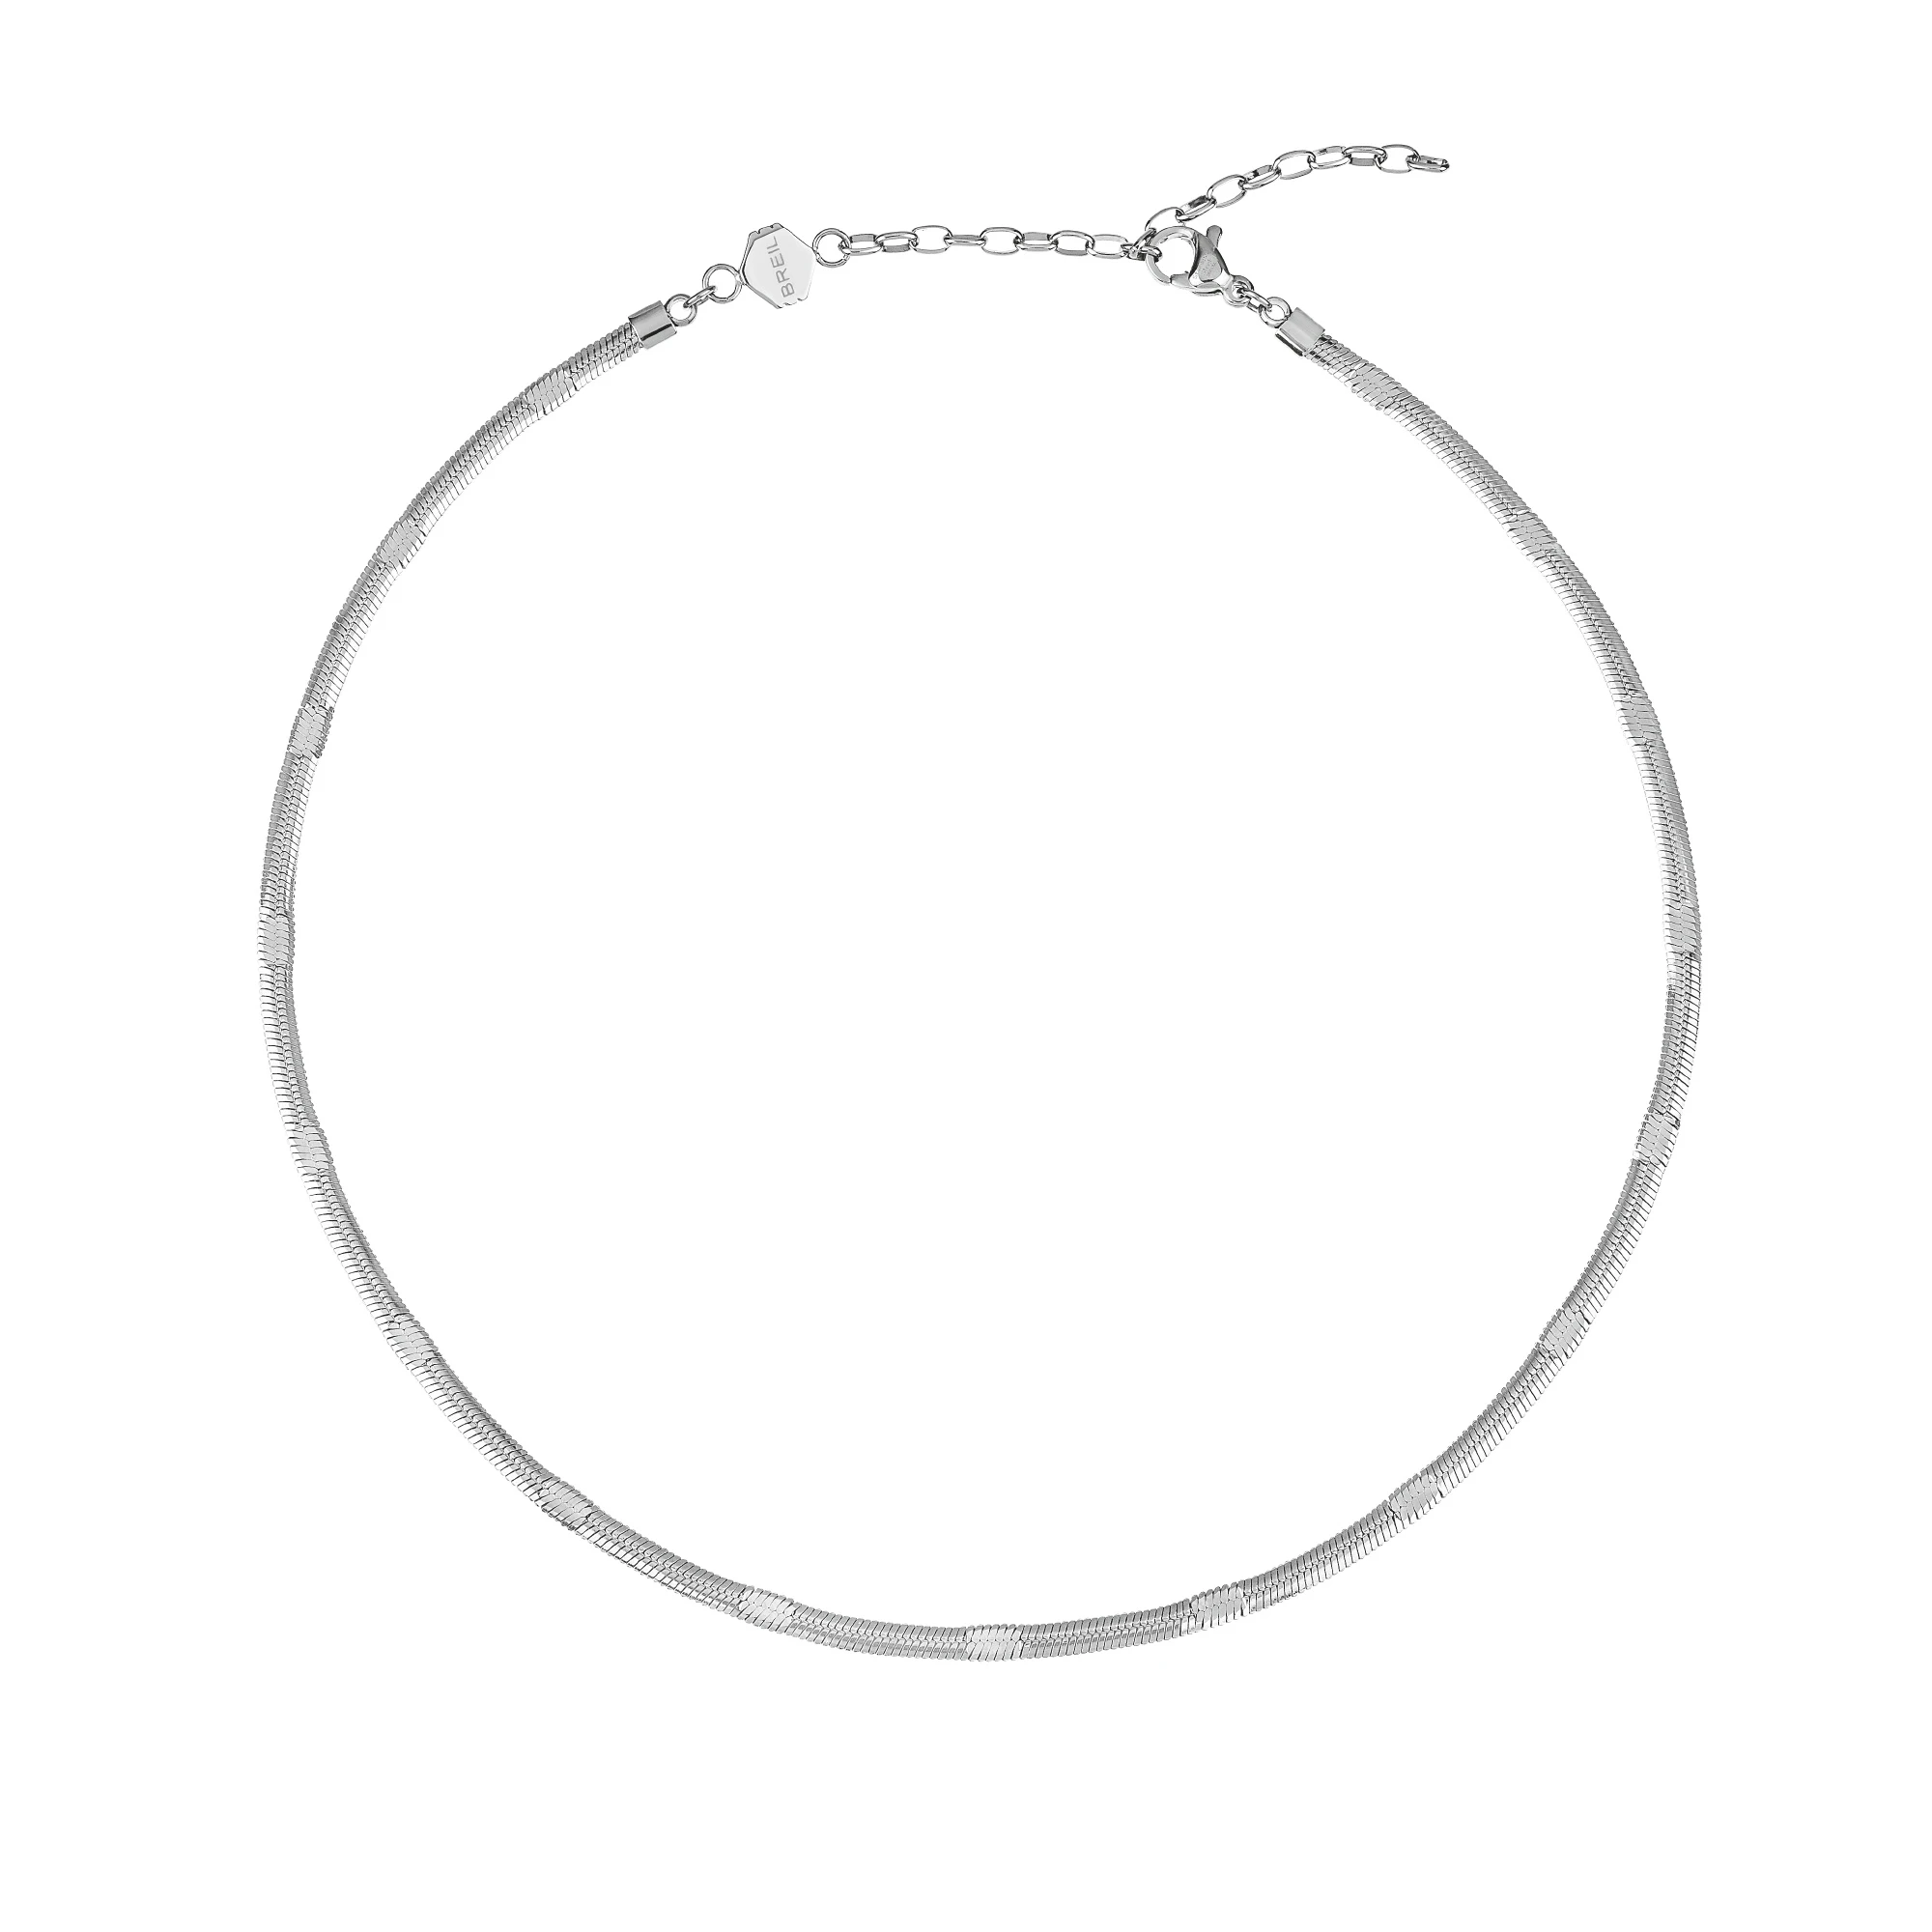 SINUOUS - STAINLESS STEEL NECKLACE - 1 - TJ3092 | Breil